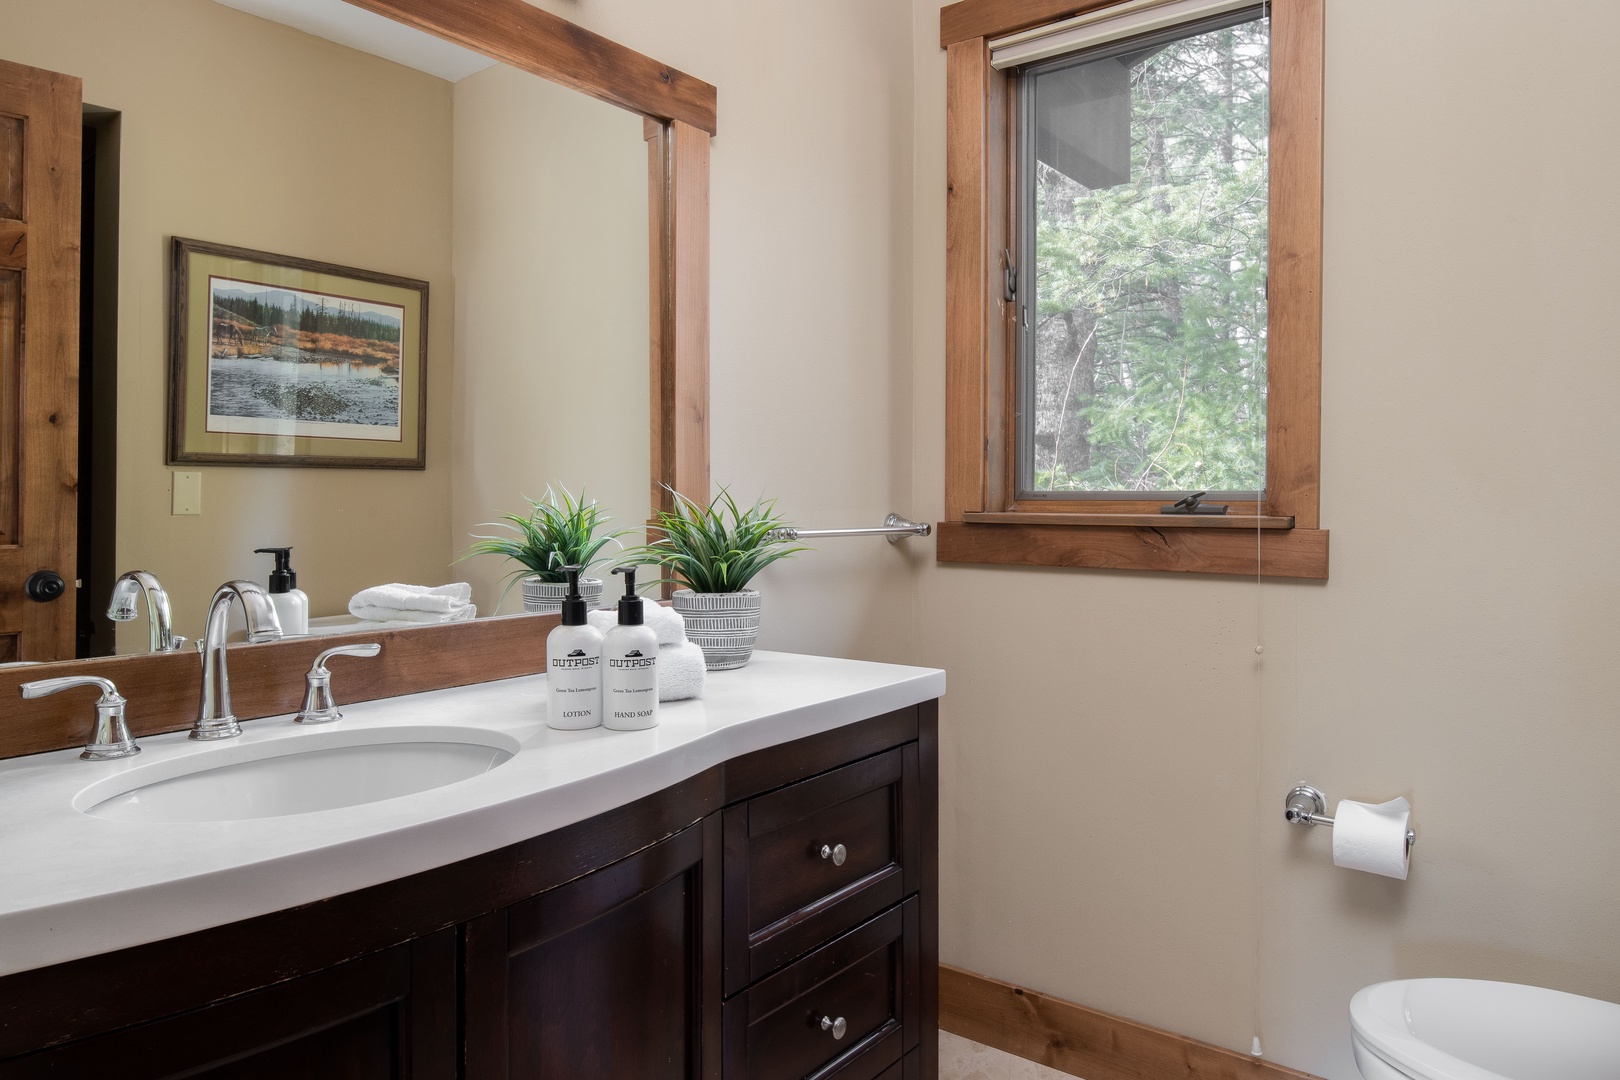 Second guest bathroom